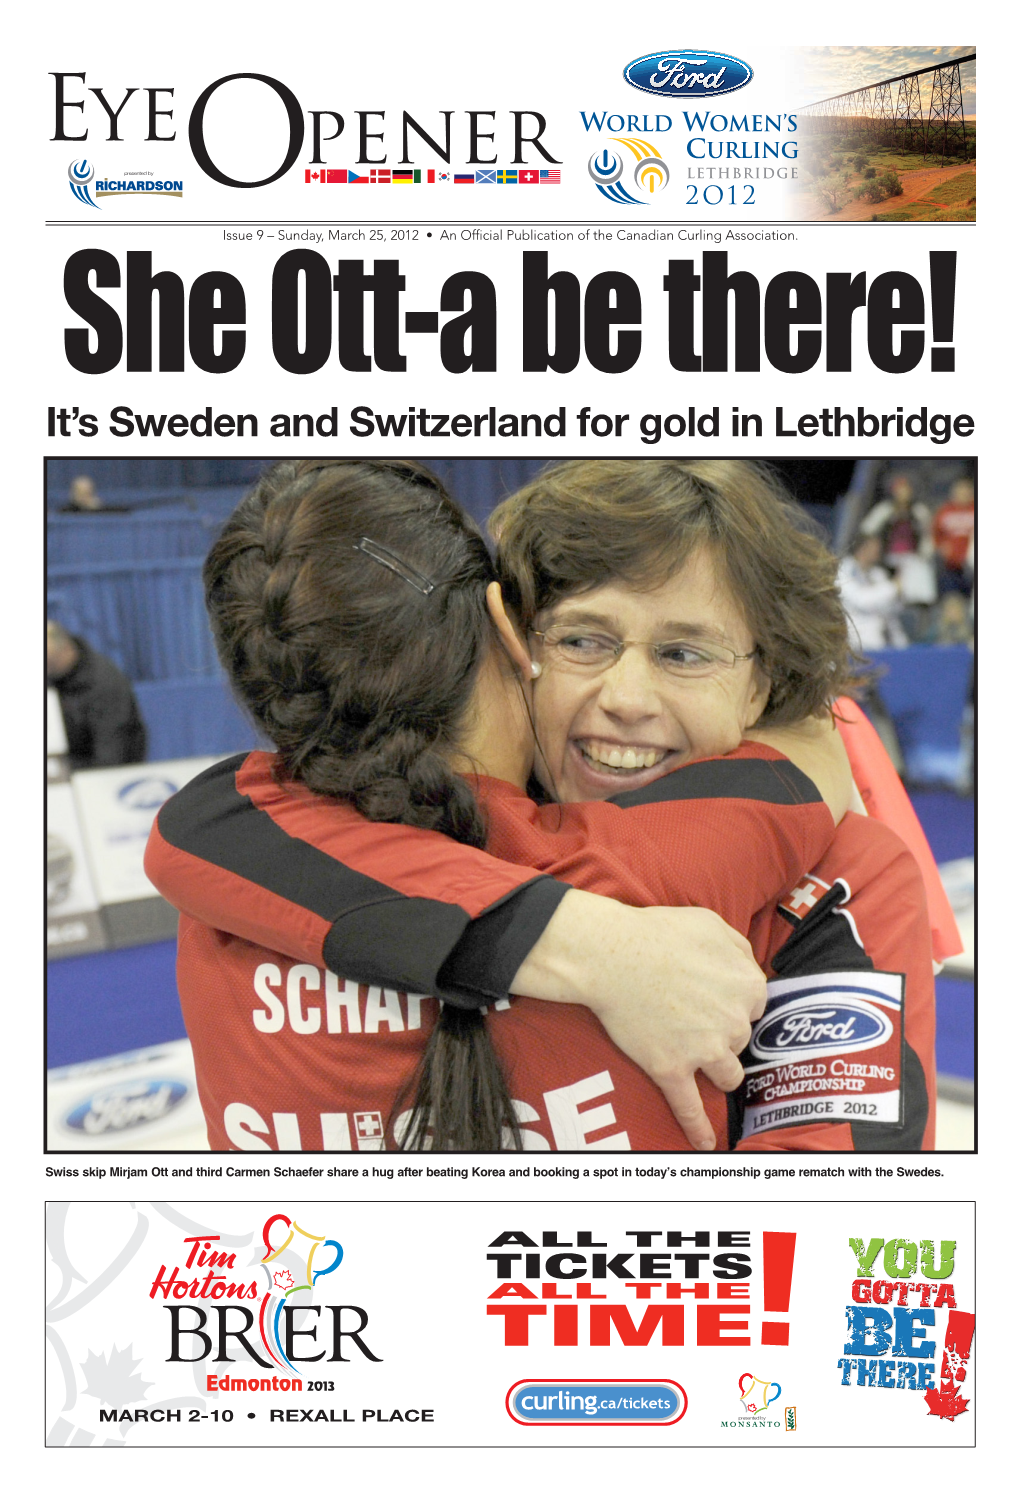 It's Sweden and Switzerland for Gold in Lethbridge